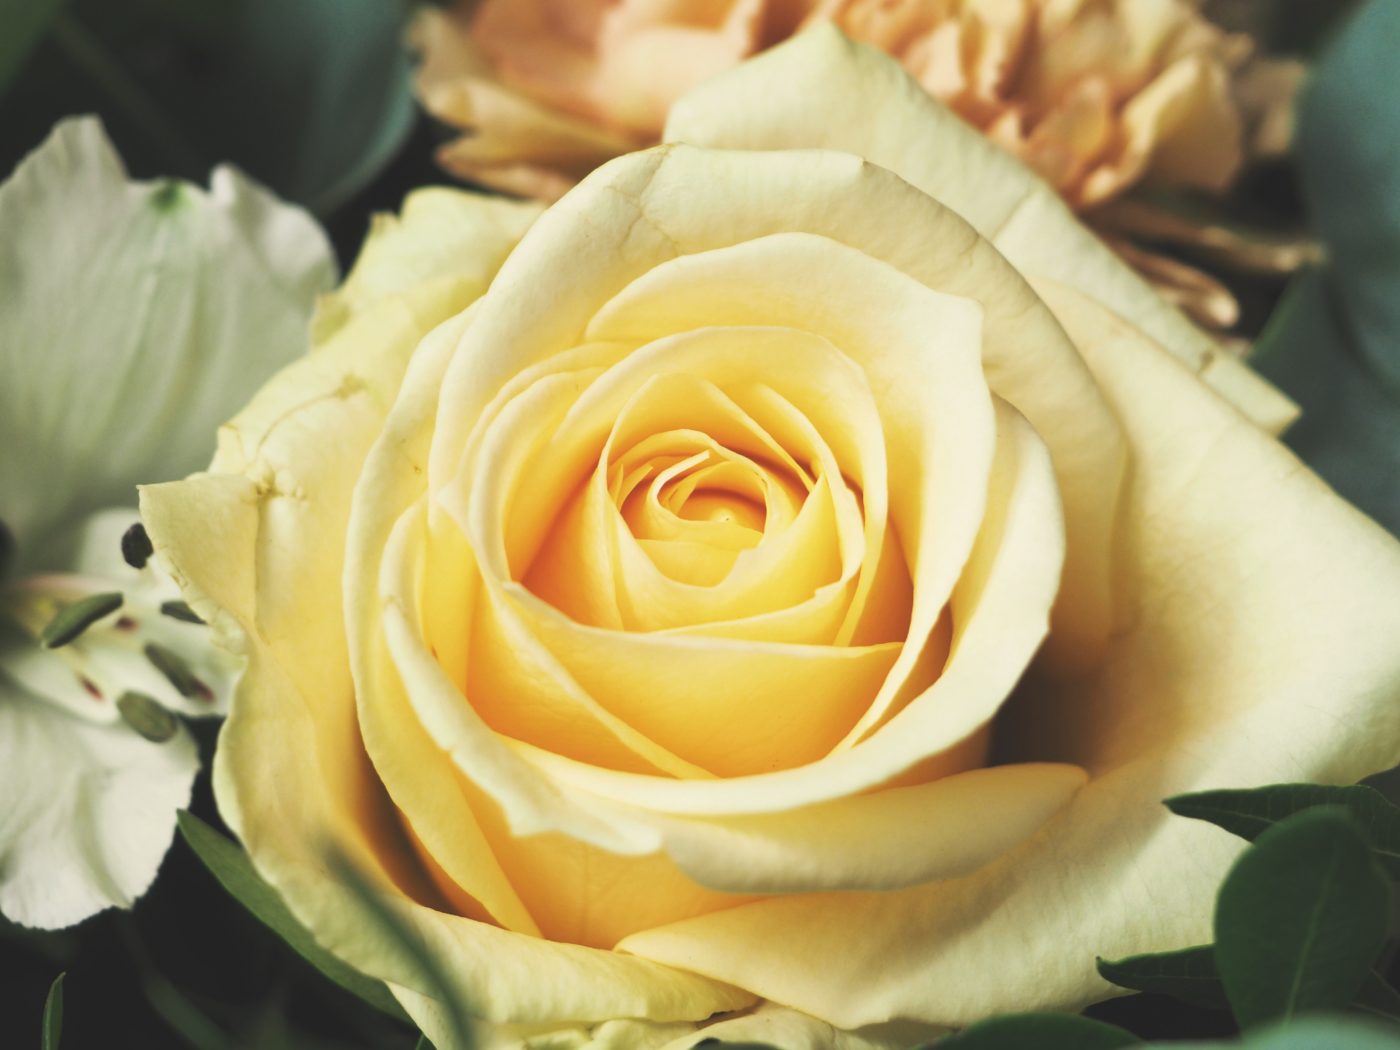 Close up of a yellow rose with other flower varieties in the background.